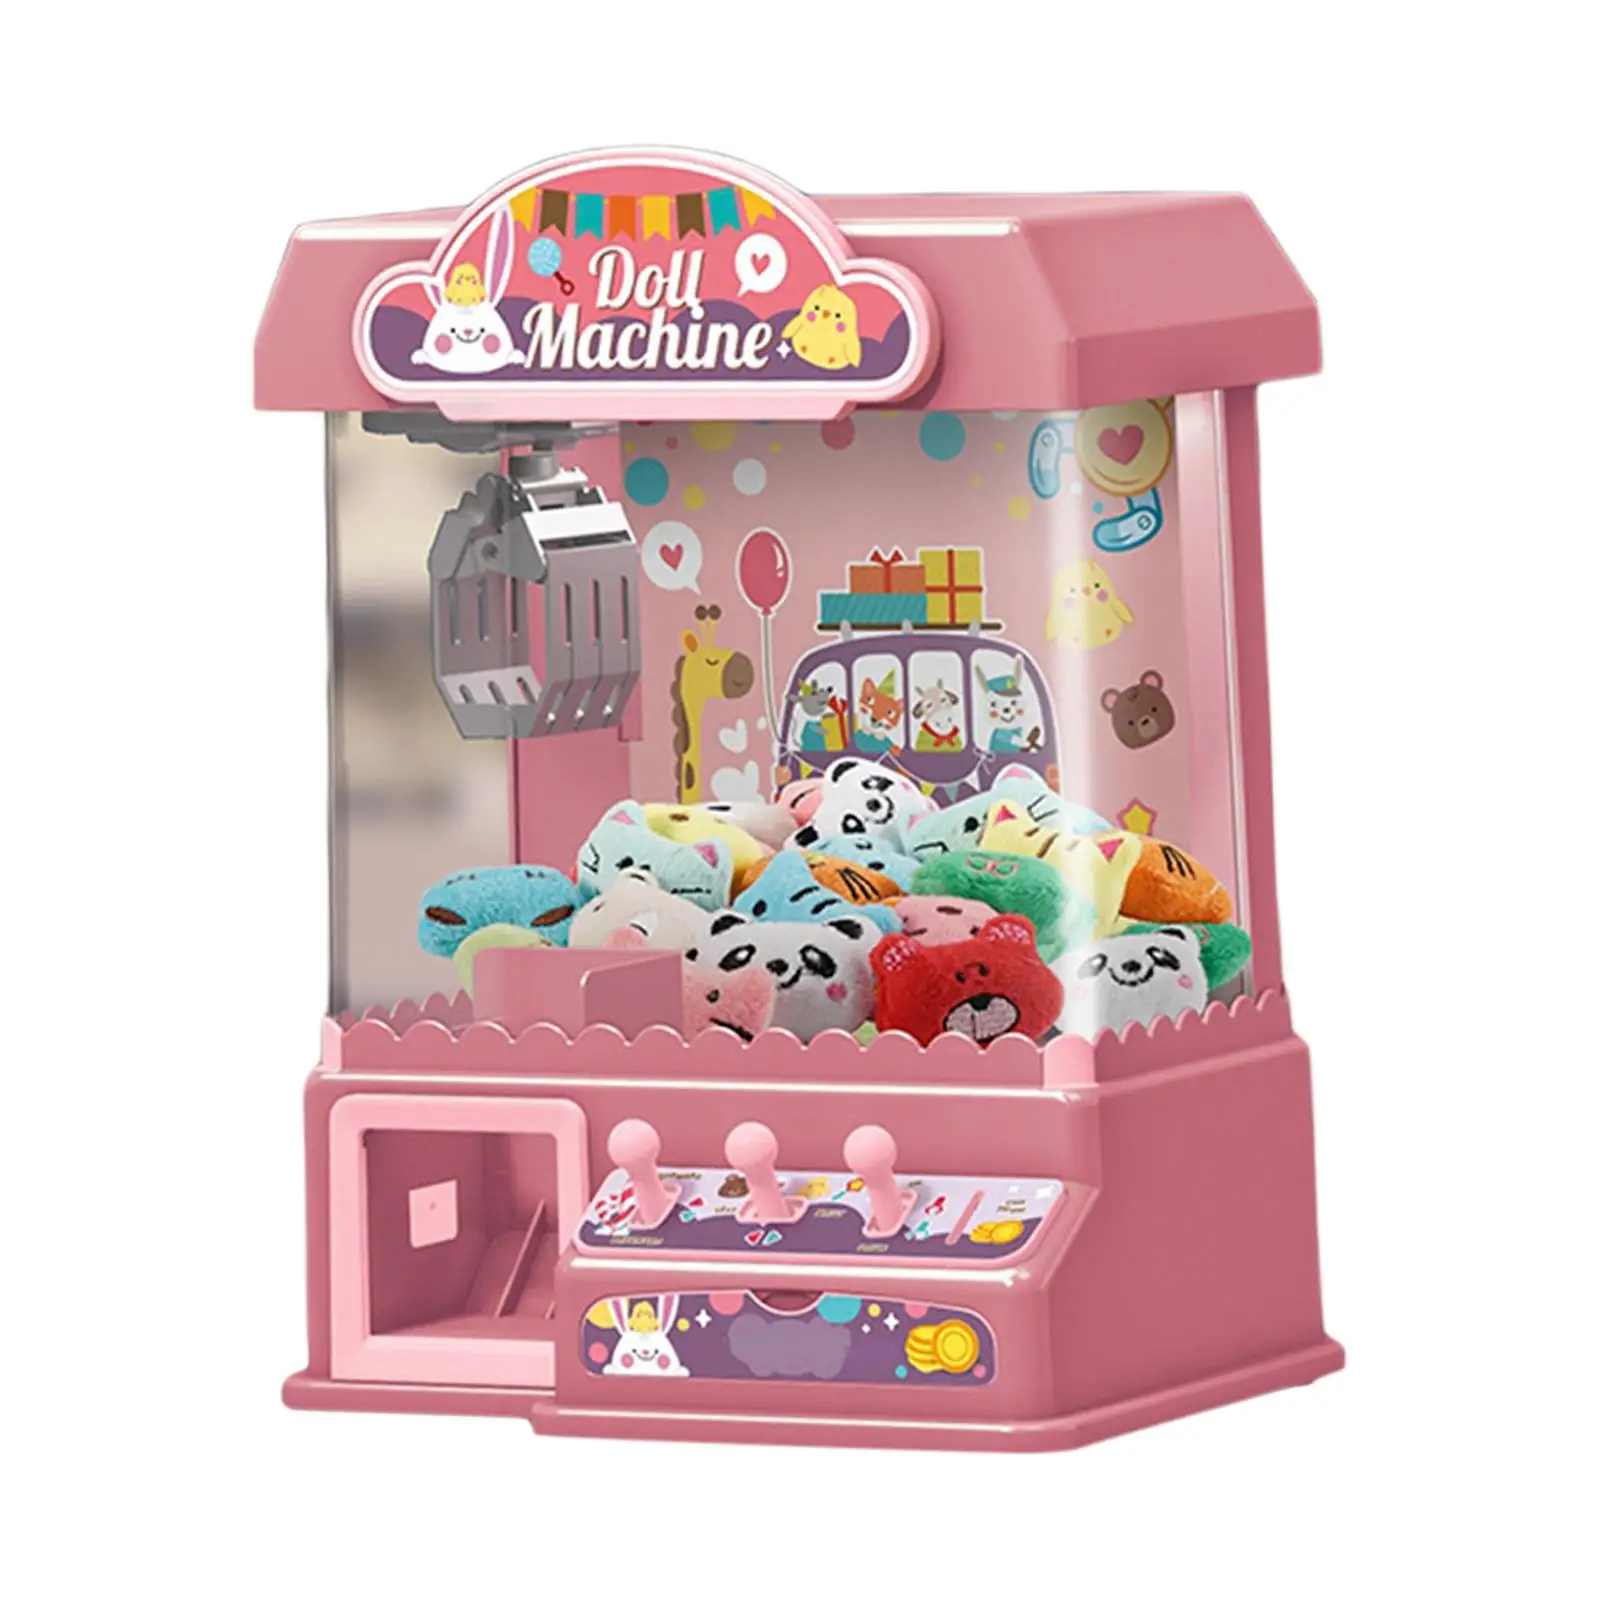 Claw Machine Vending Machine Toy Claw Catch Toy Manual Doll Machine Candy Grabber for Party Birthday Outdoor Garden Indoor